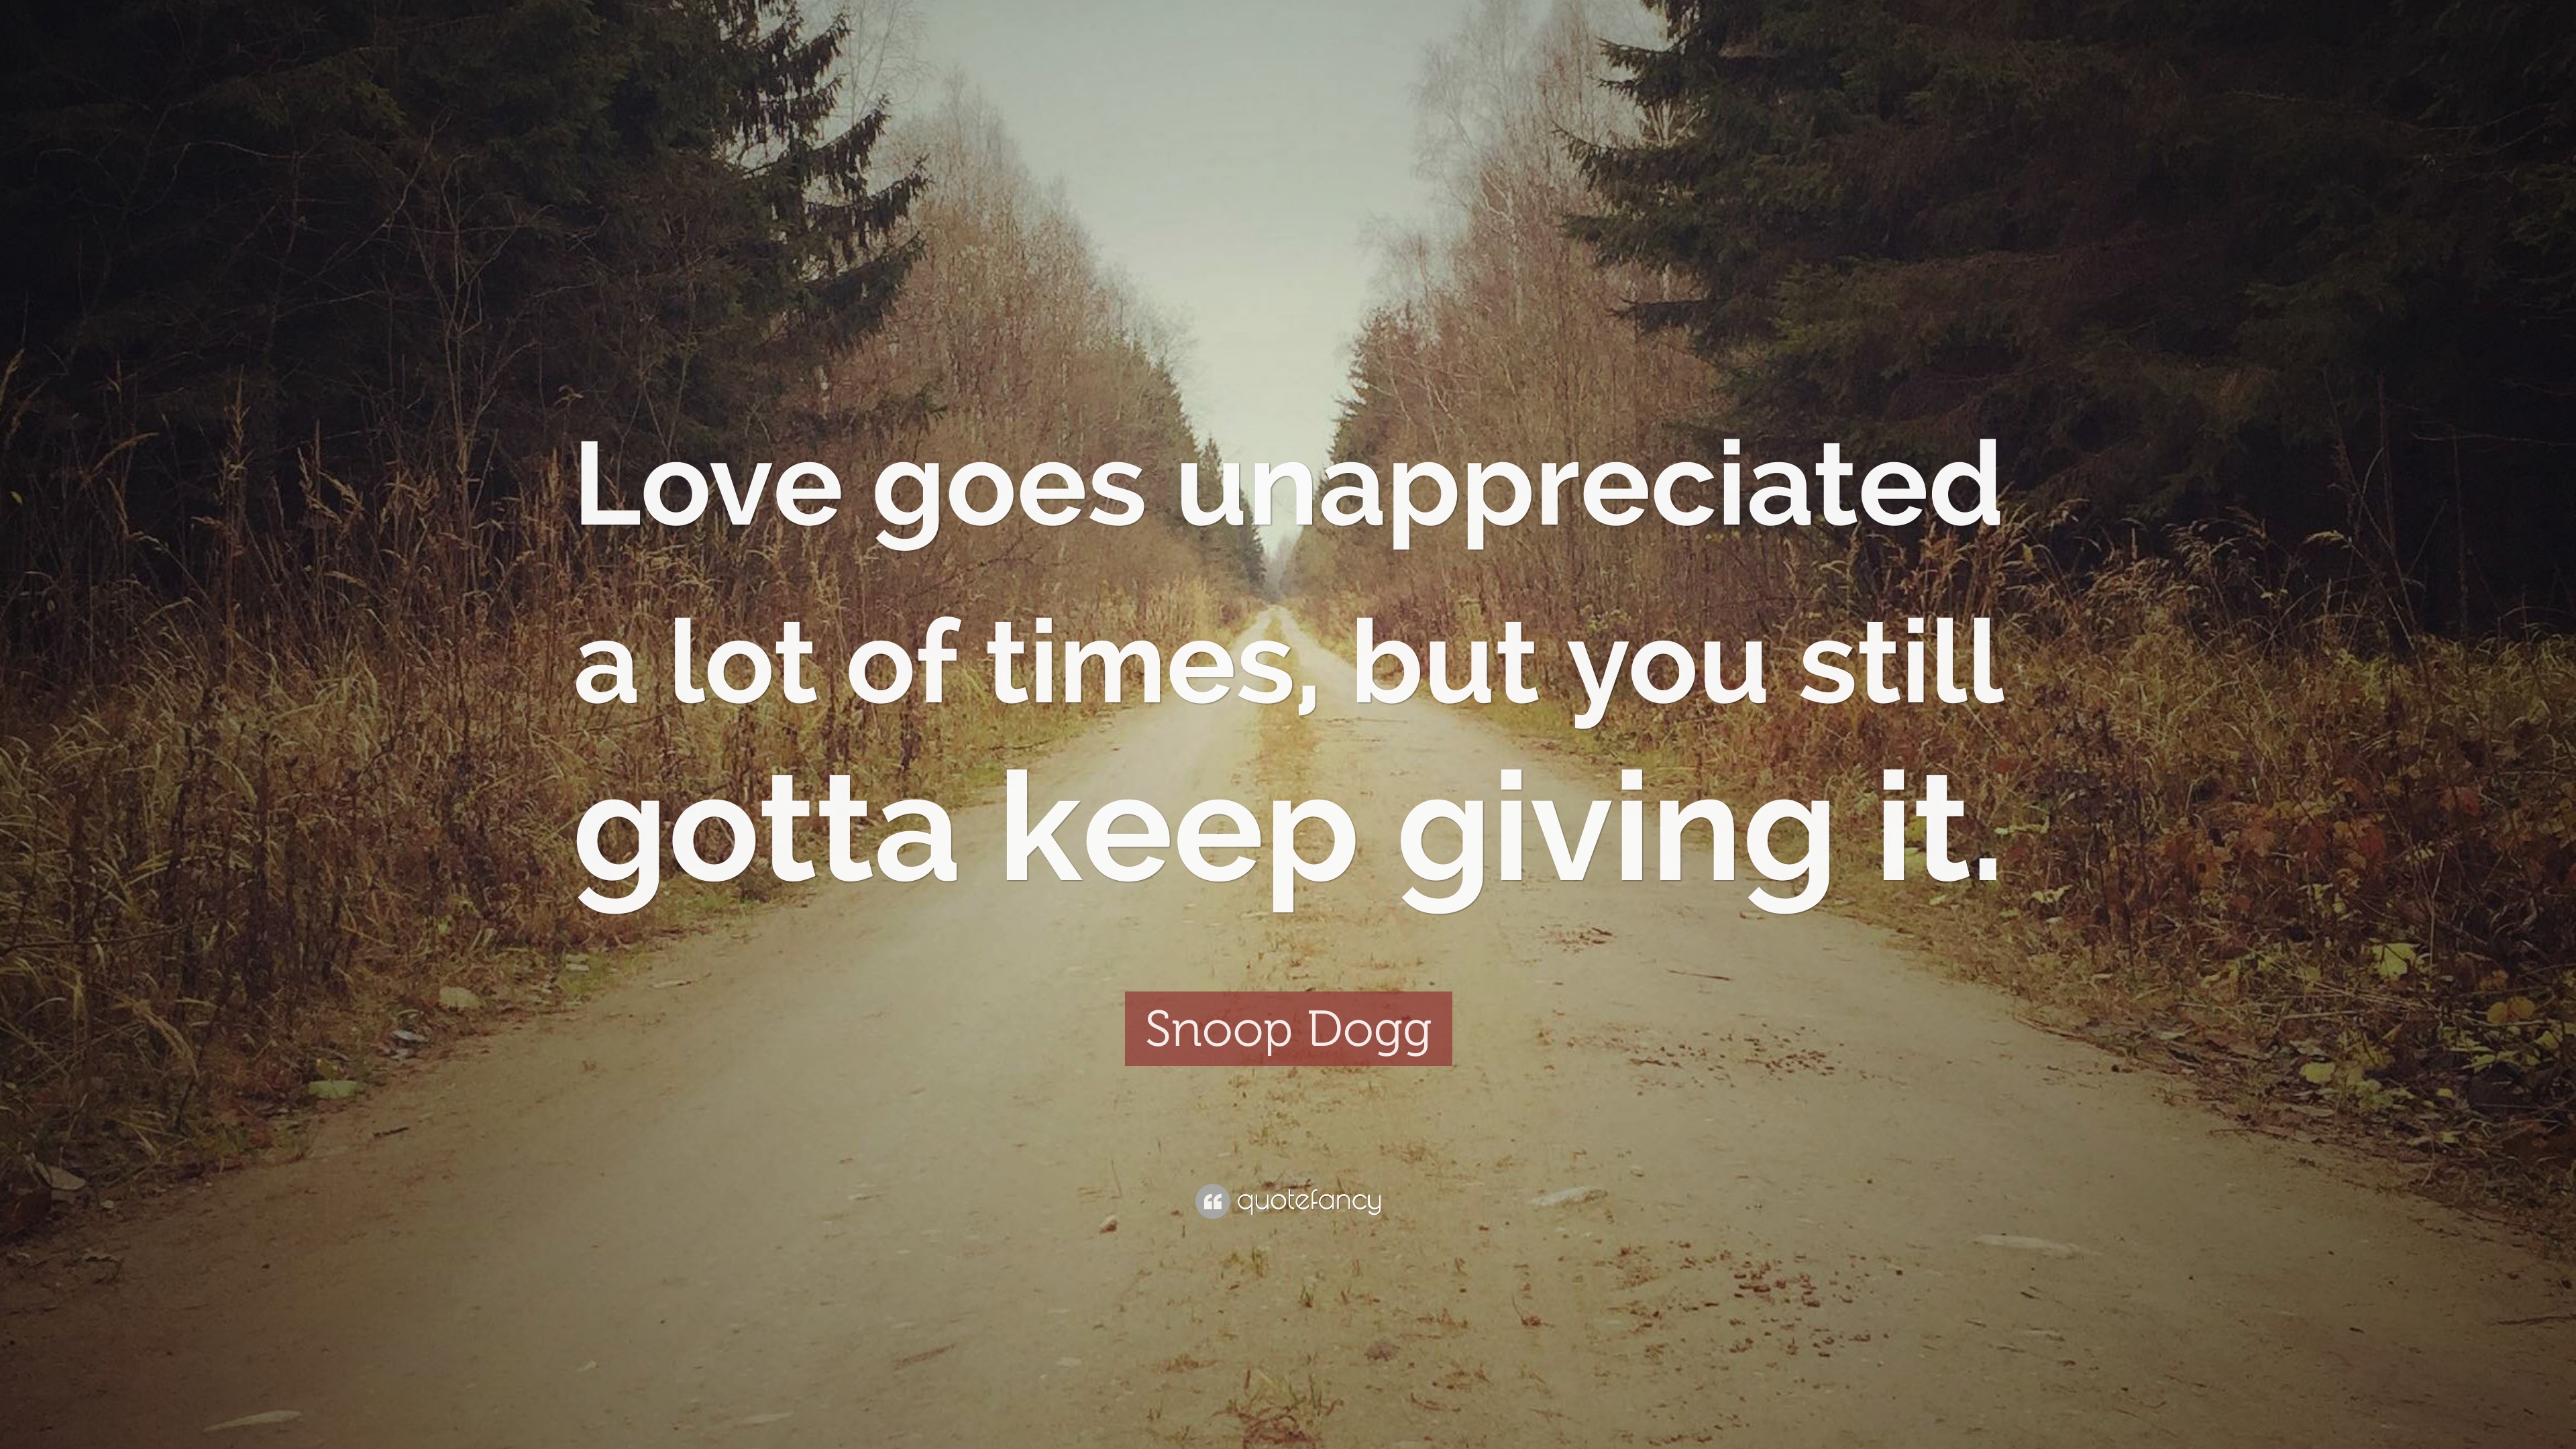 7 Snoop Dogg Quotes About Love